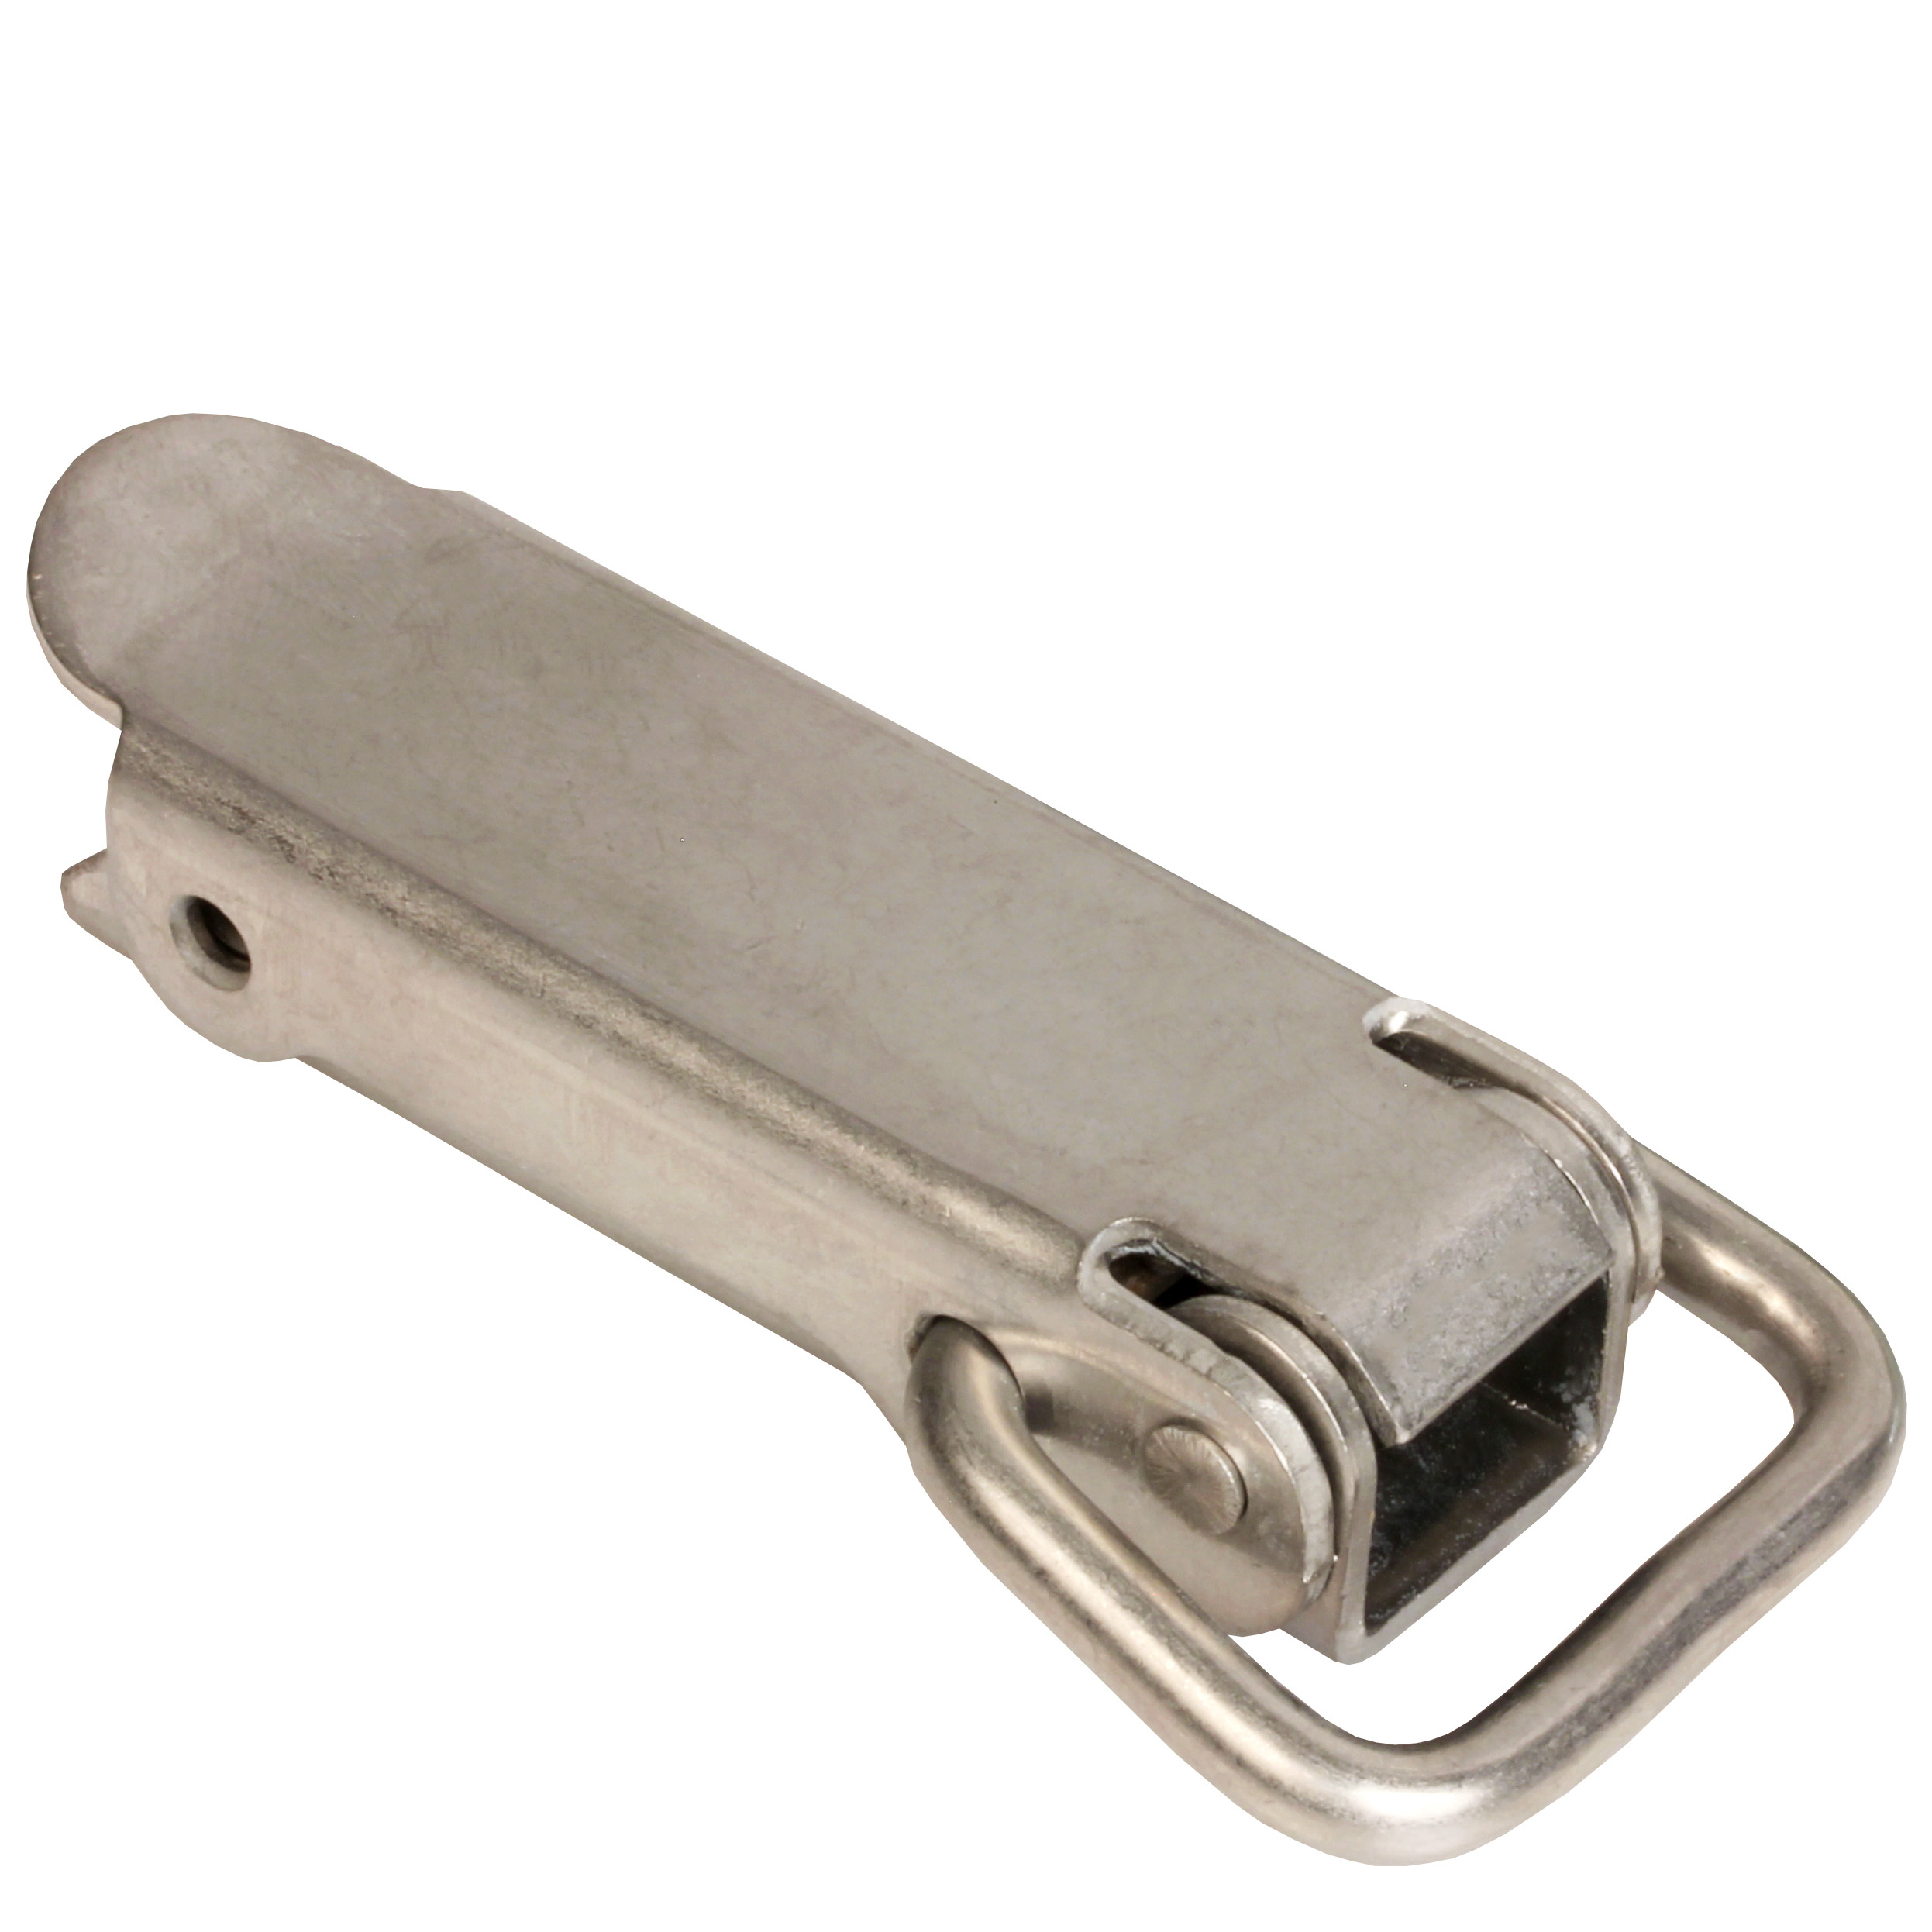 Sprung toggle latch with connecting link - Standard - Stainless steel - 